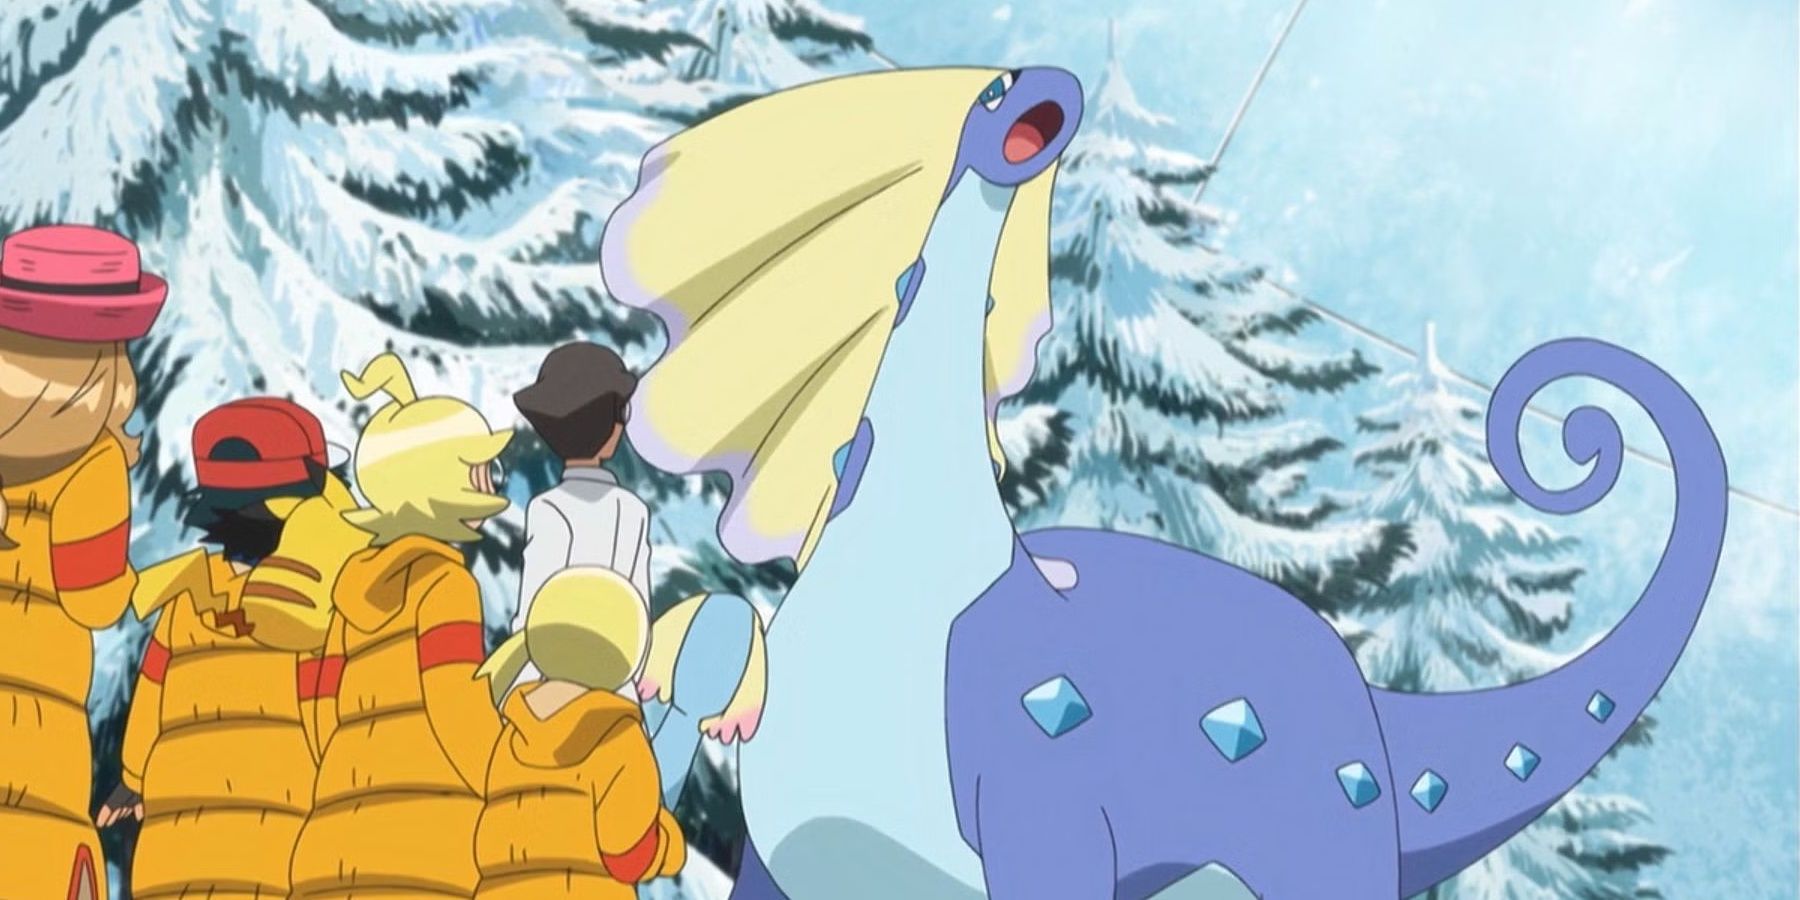 A screenshot of Aurorus from the Pokemon anime